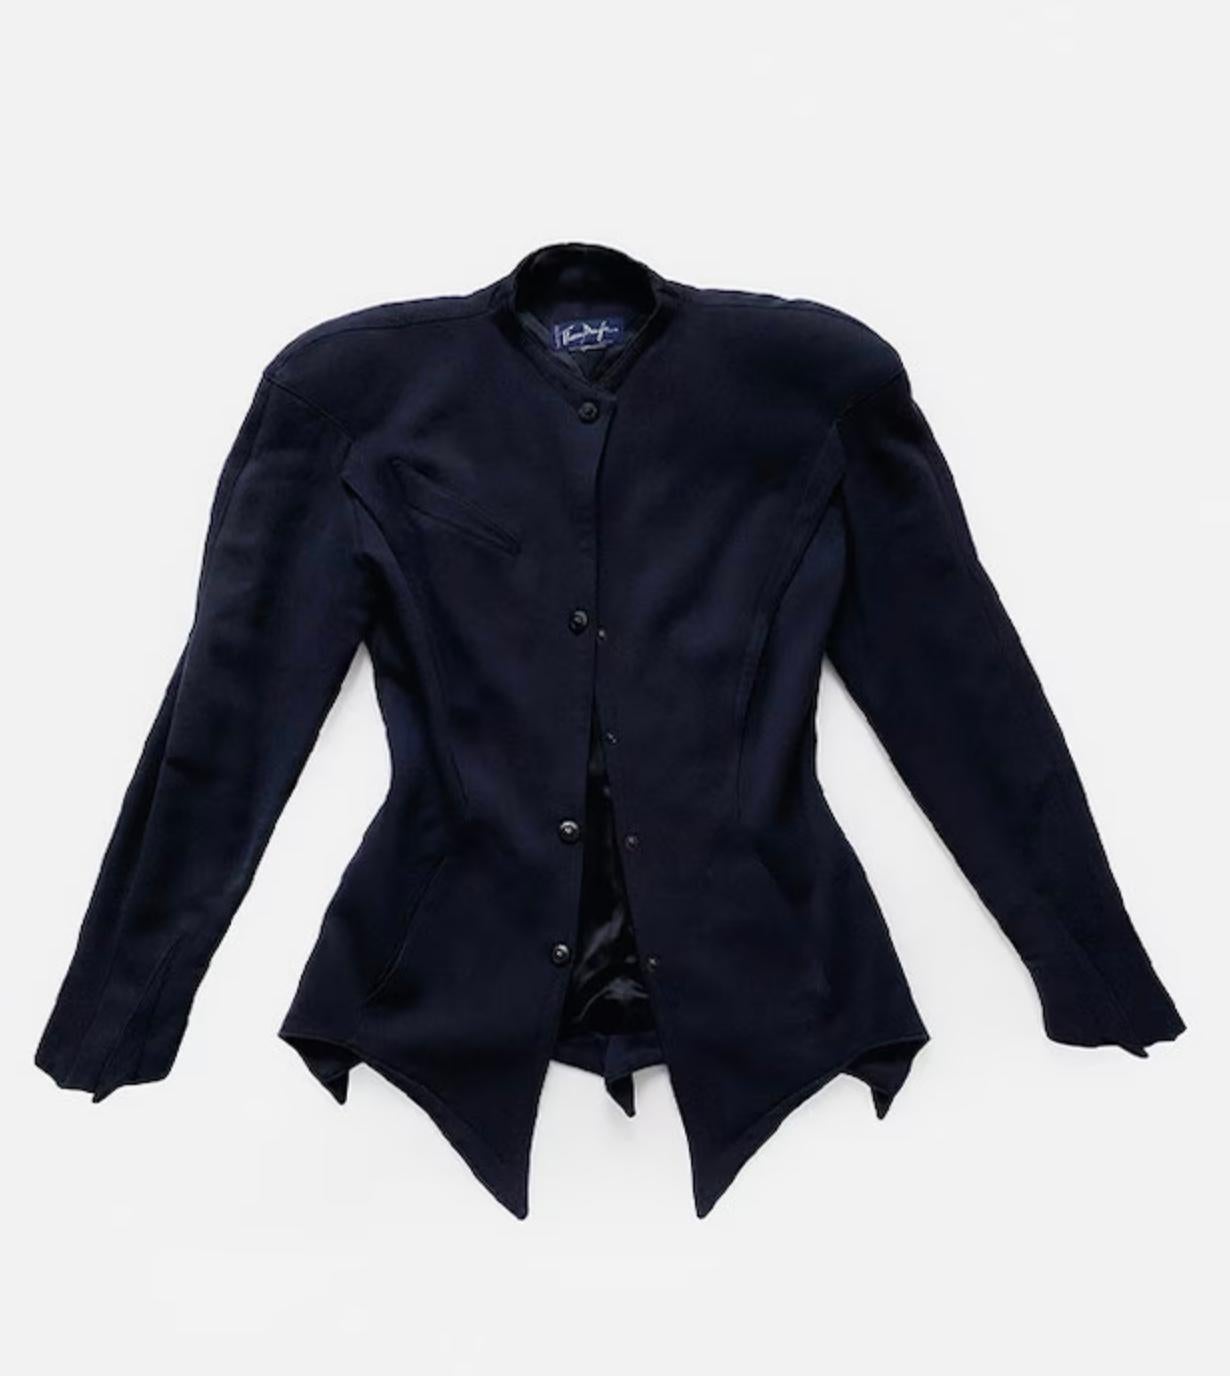 Thierry Mugler Rare Dramatic Suit Skirtsuit Silhouette Wool Blazer Skirt 80s For Sale 4